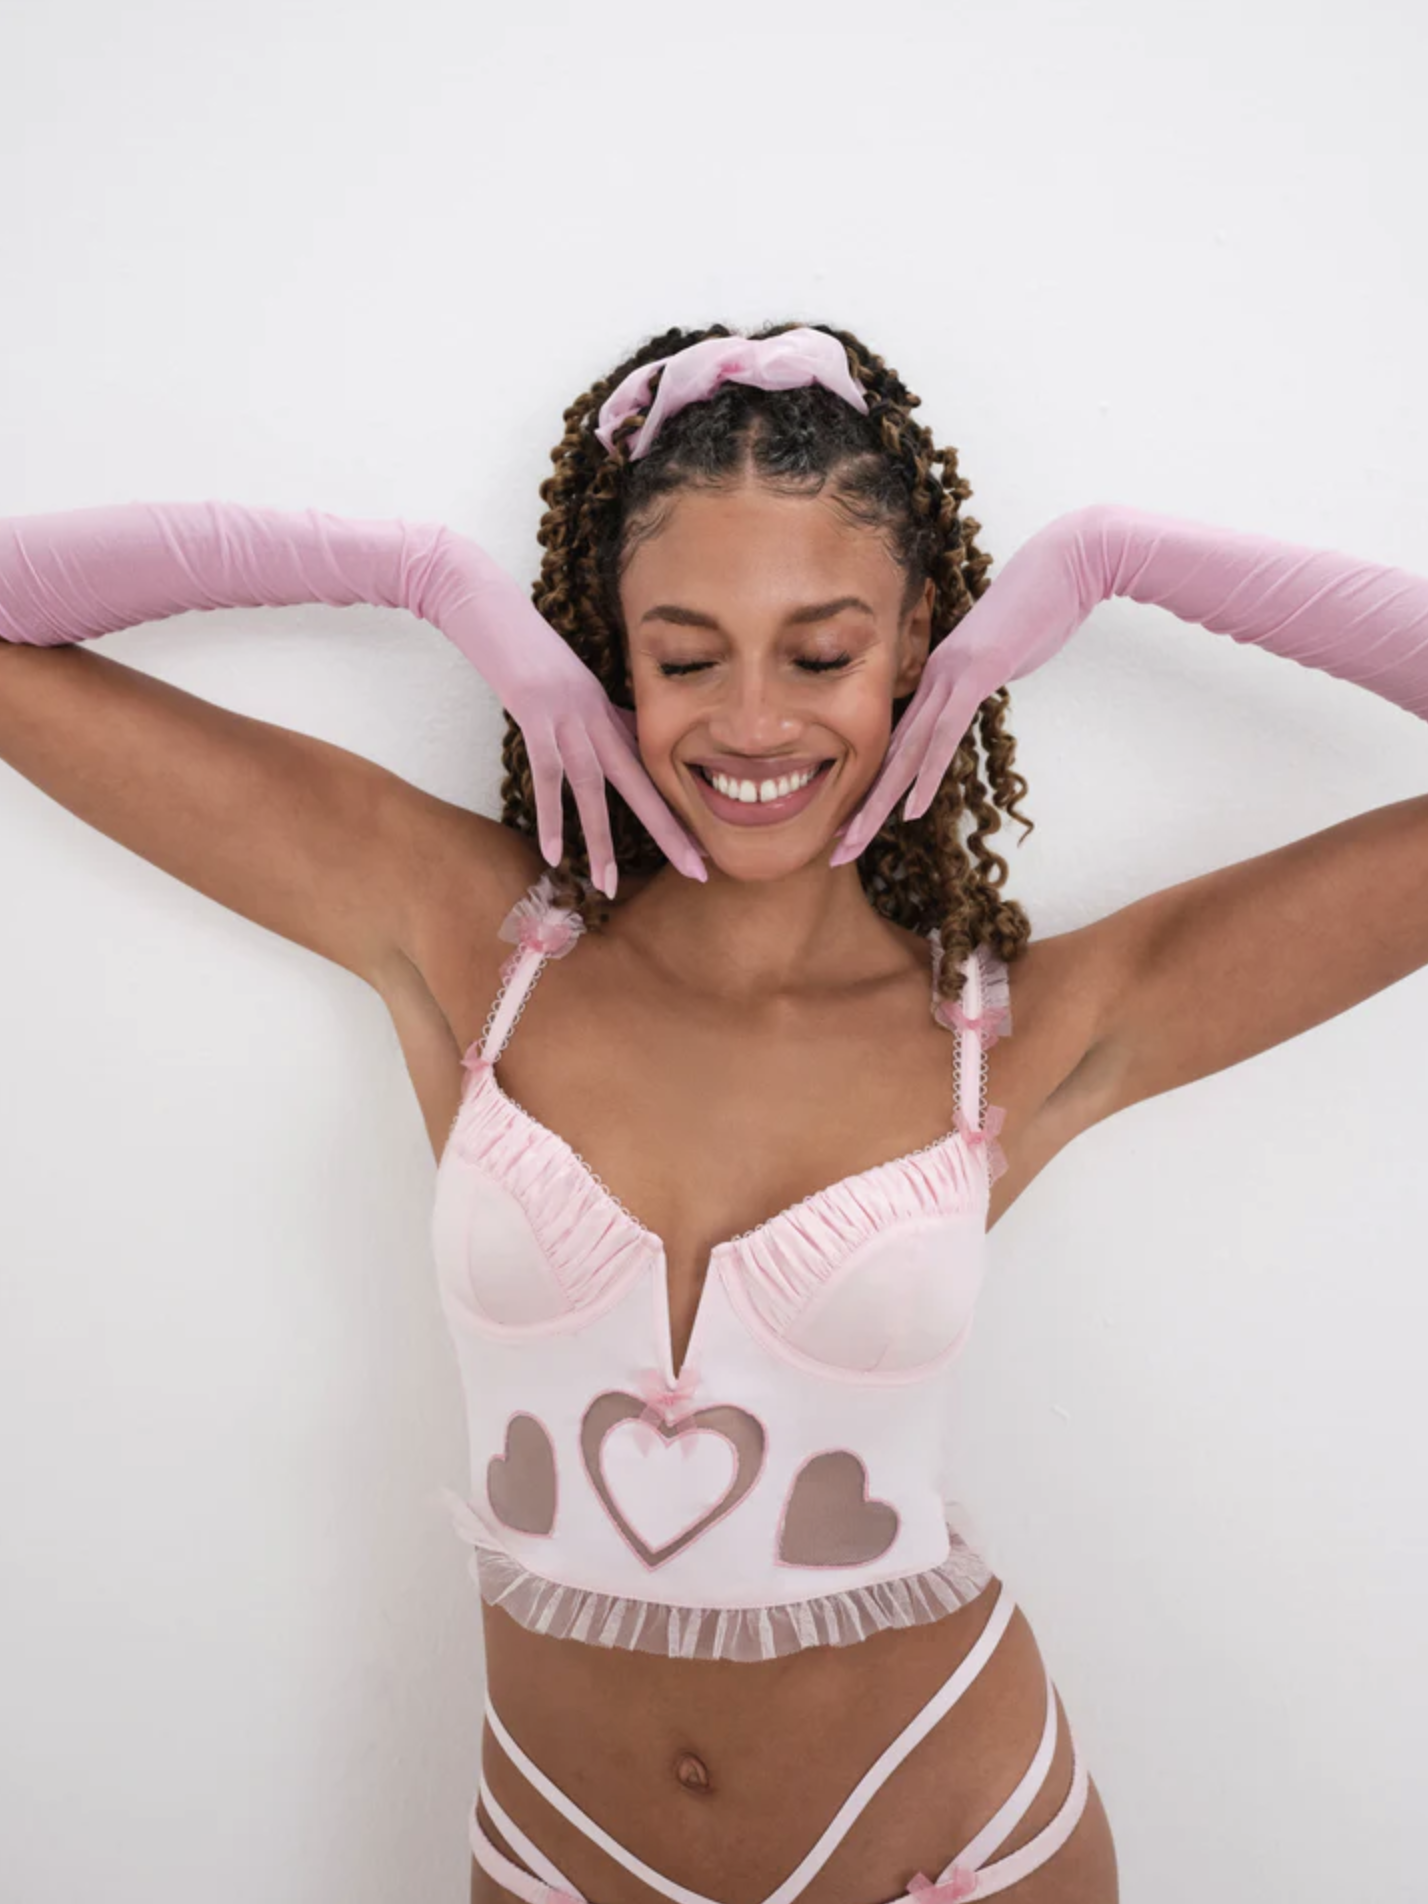 The 60 Prettiest Lingerie Pieces To Spice Up The Bedroom This Valentine's  Day